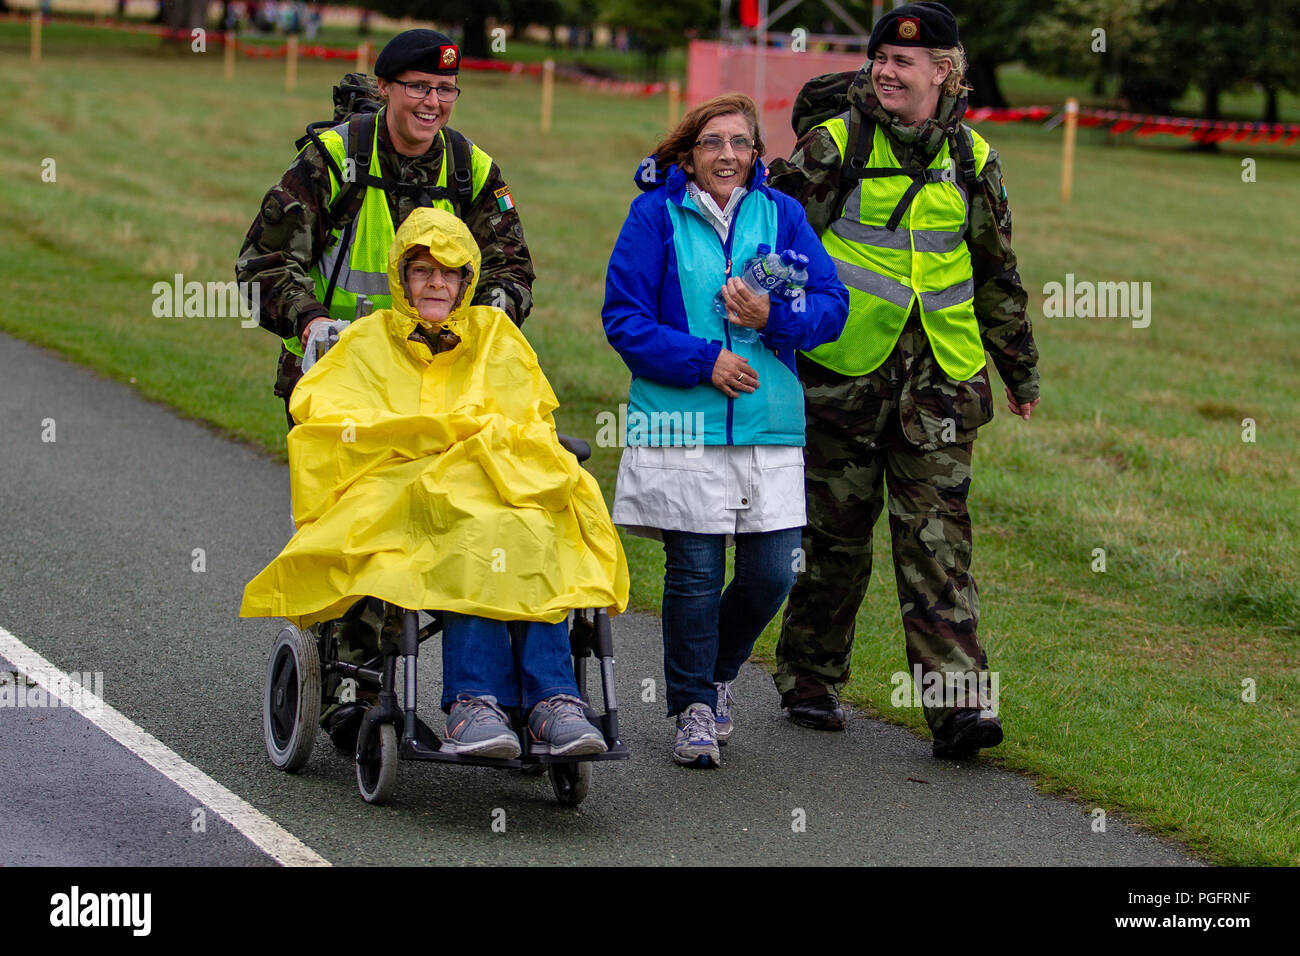 Dublin, Ireland. 26 August 2018. Worshipers arriving at phoenix park in Dublin for the Closing mass of His Holiness Pope Francis two day visit to Ireland Credit: Bonzo/Alamy Live News Stock Photo